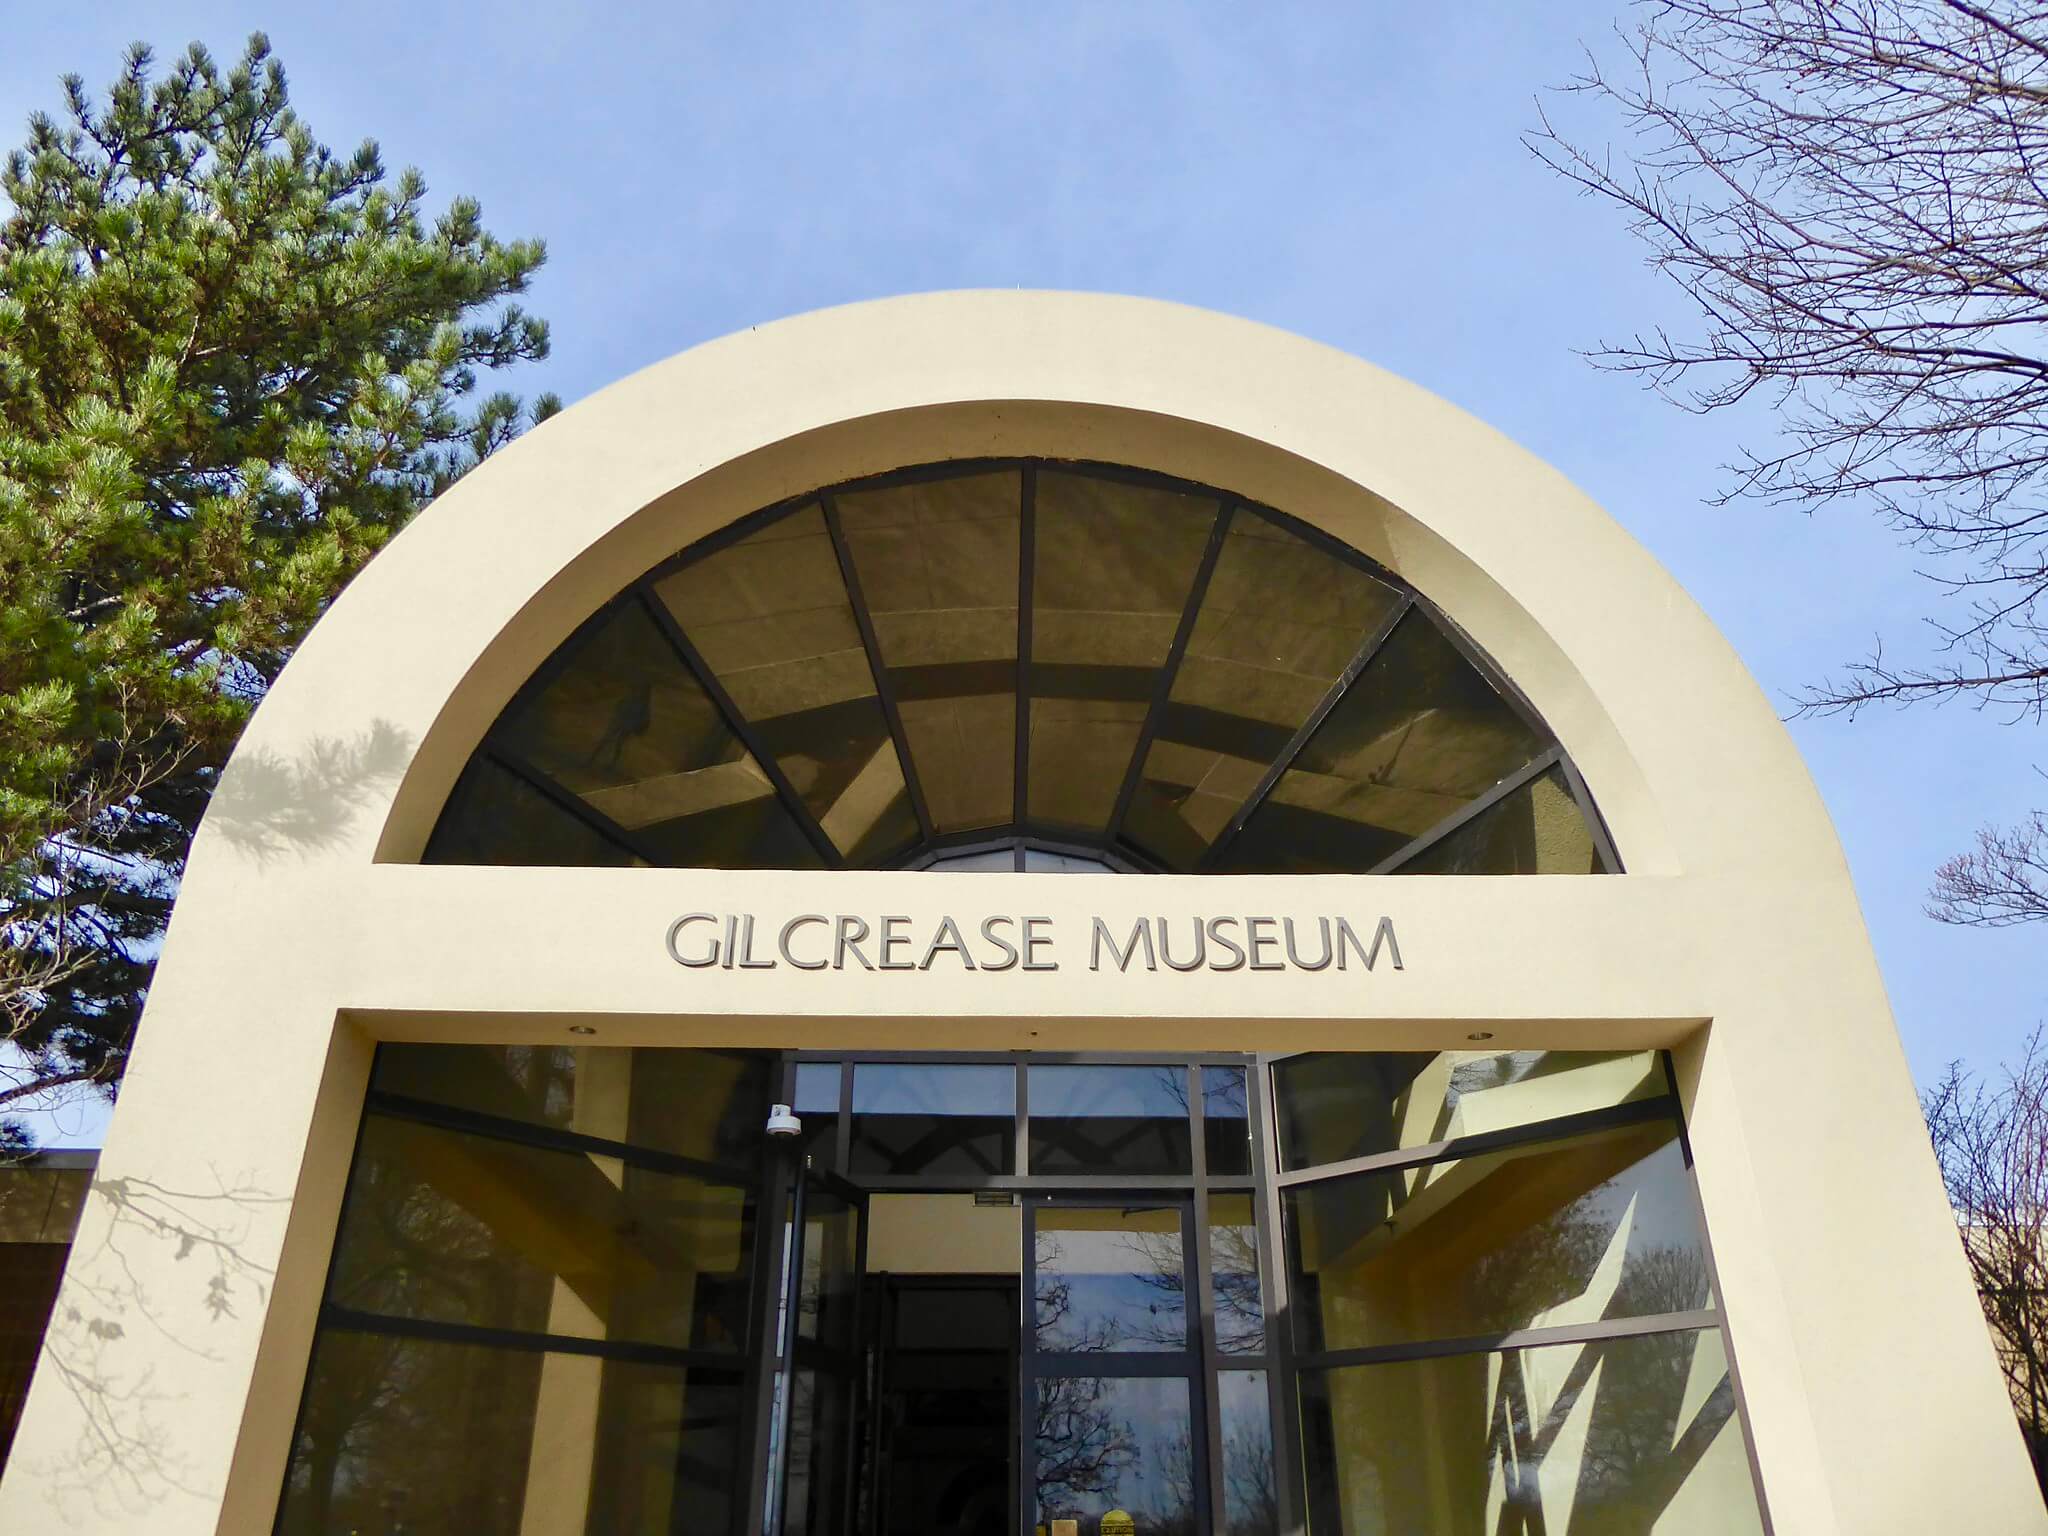 signage above the entrance to the gilcrease museum